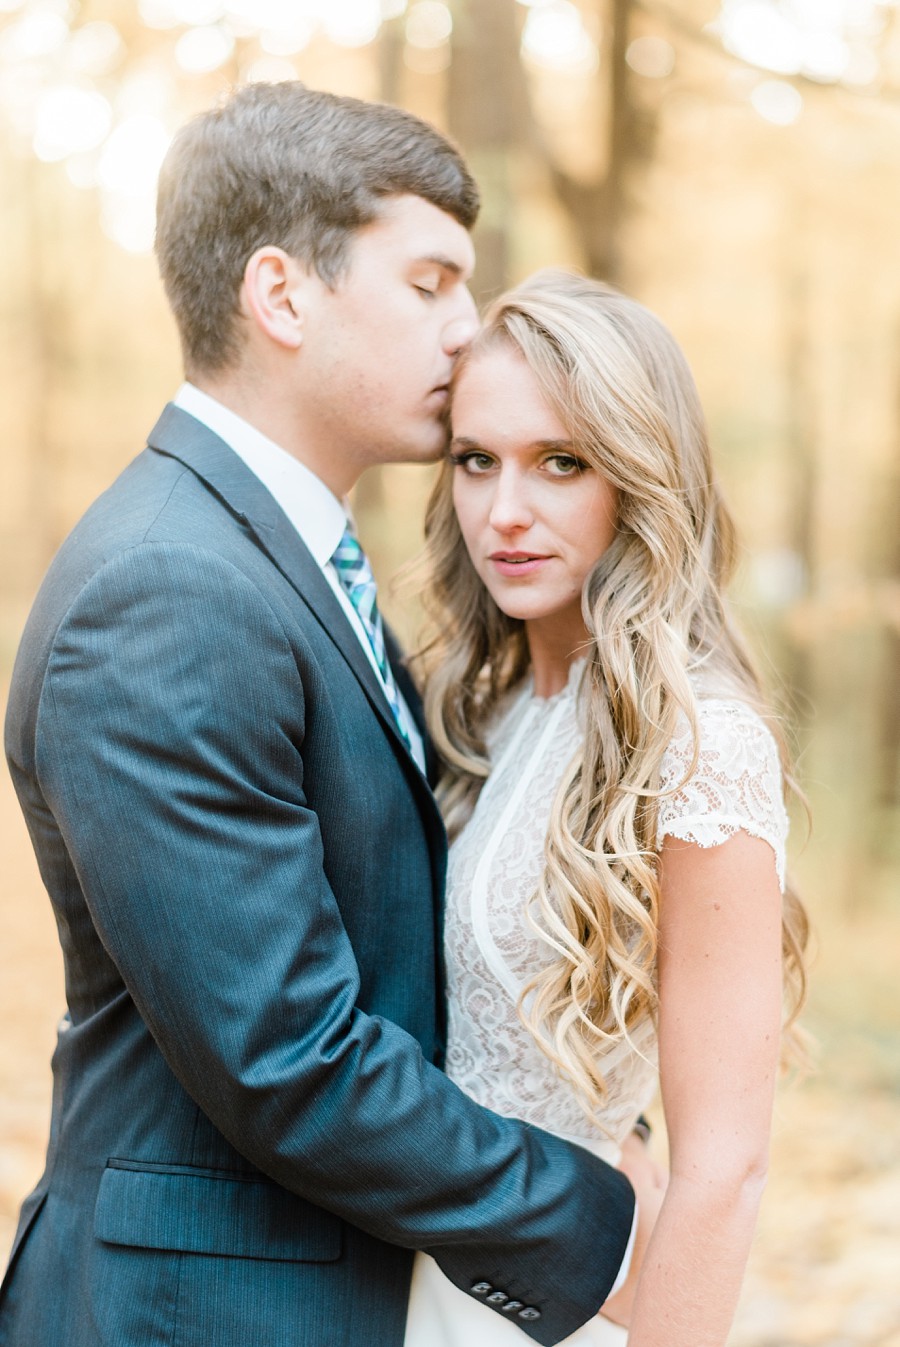 holcomb gardens engagement session, ashley link photography